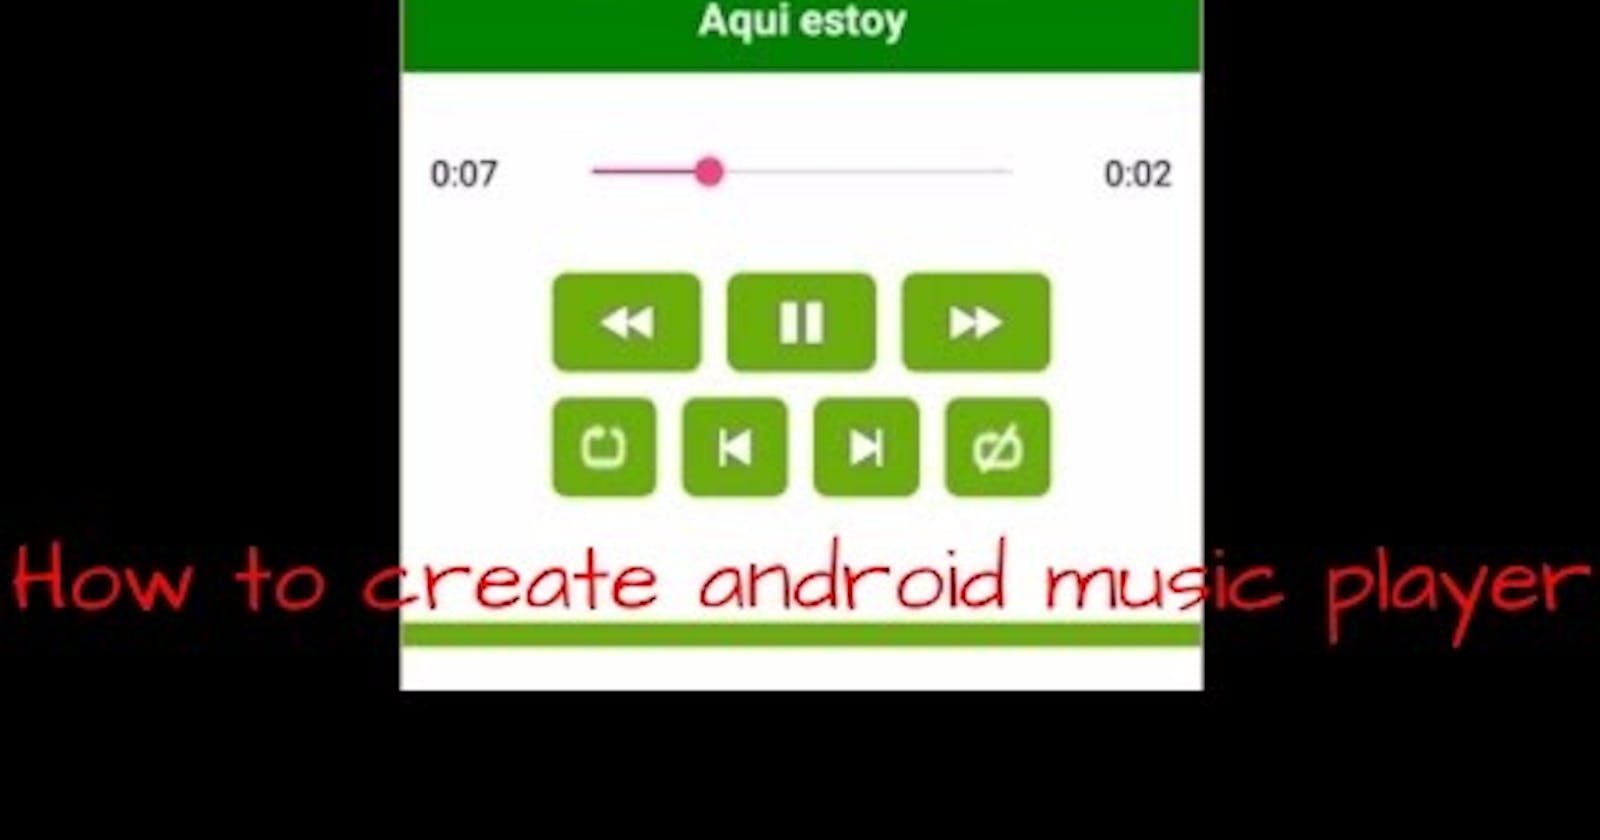 How to create android music player android studio java code for controller code programming